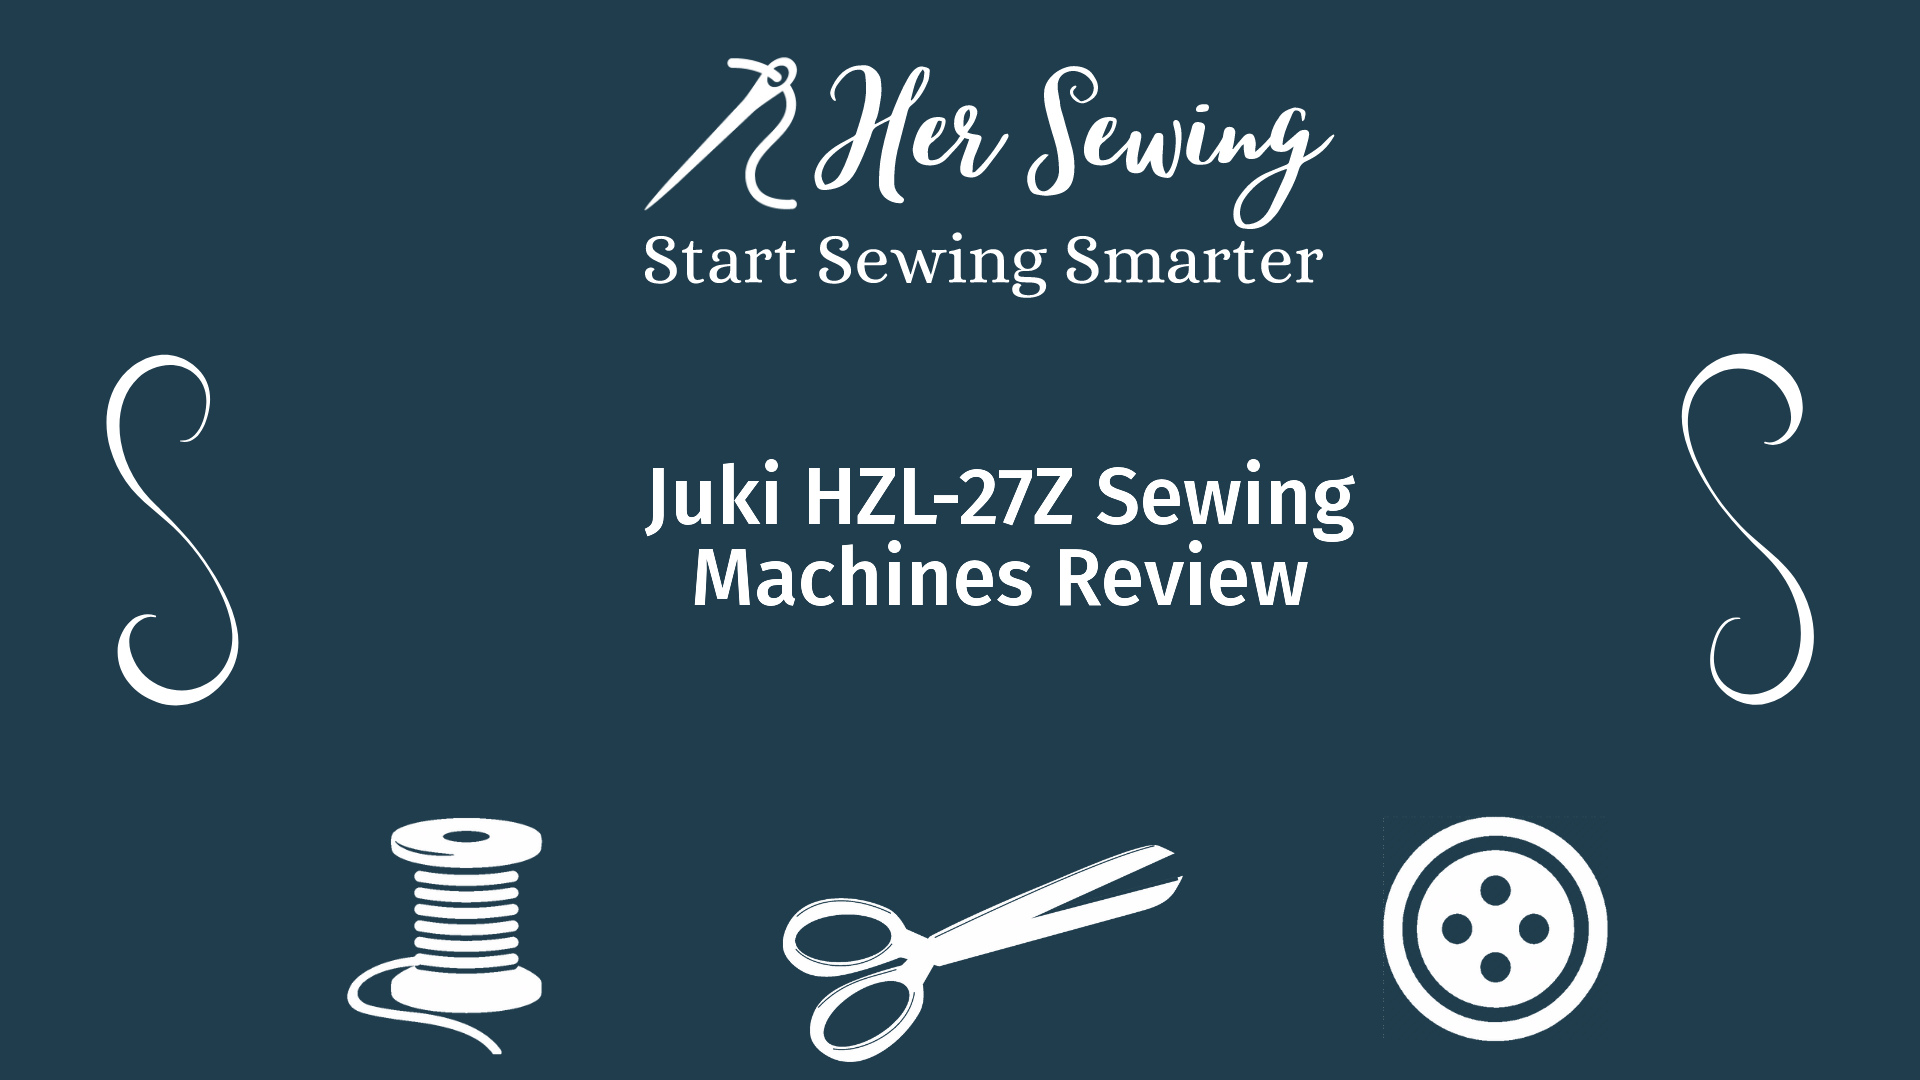 Juki HZL-27Z Sewing Machines Review